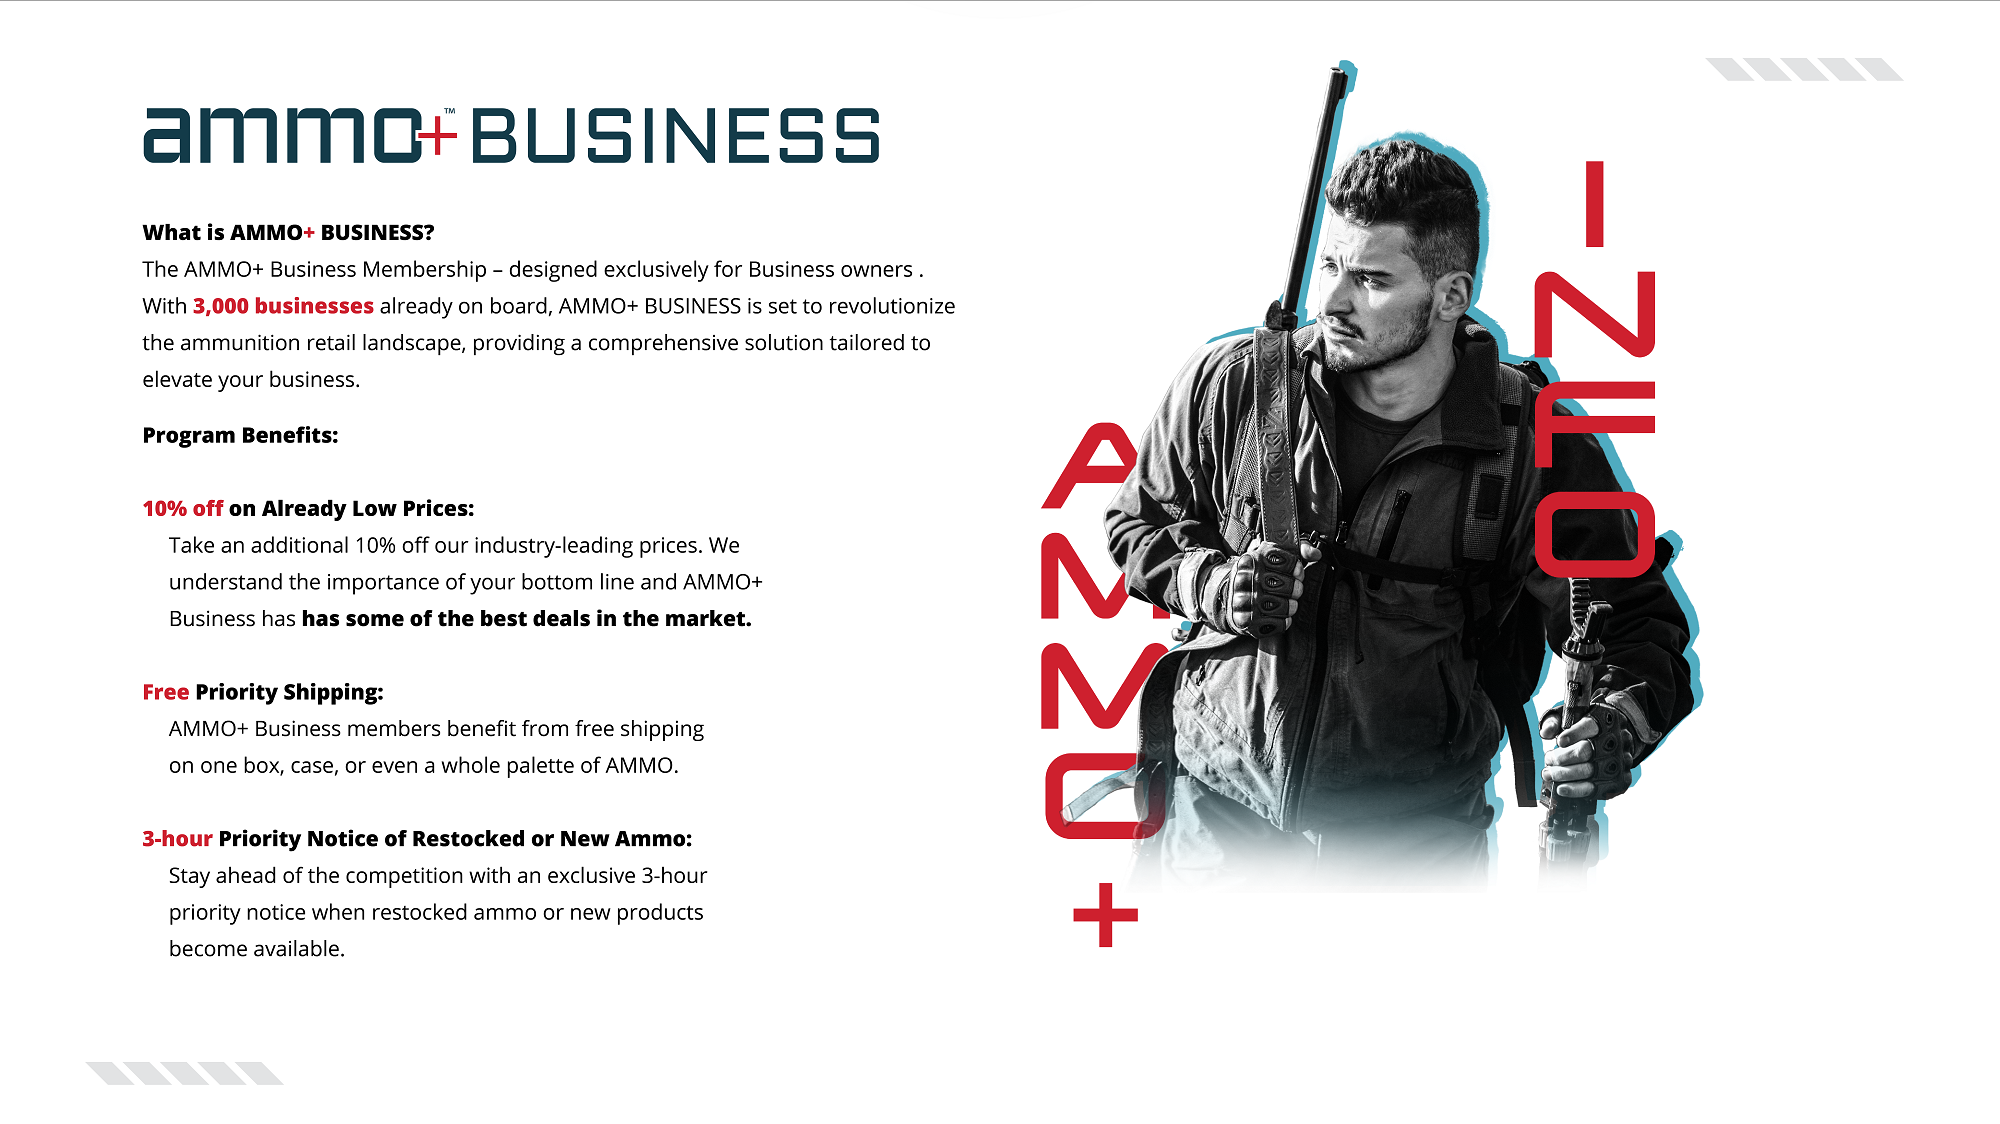 Ammo Plus Business Membership: Designed exclusively for FFL dealers - providing a comprehensive solution tailored to elevate your busines. 10% off on Already Low Prices, Free Priority Shipping and 3-hour Priority Notice of Restocked or New Ammo.